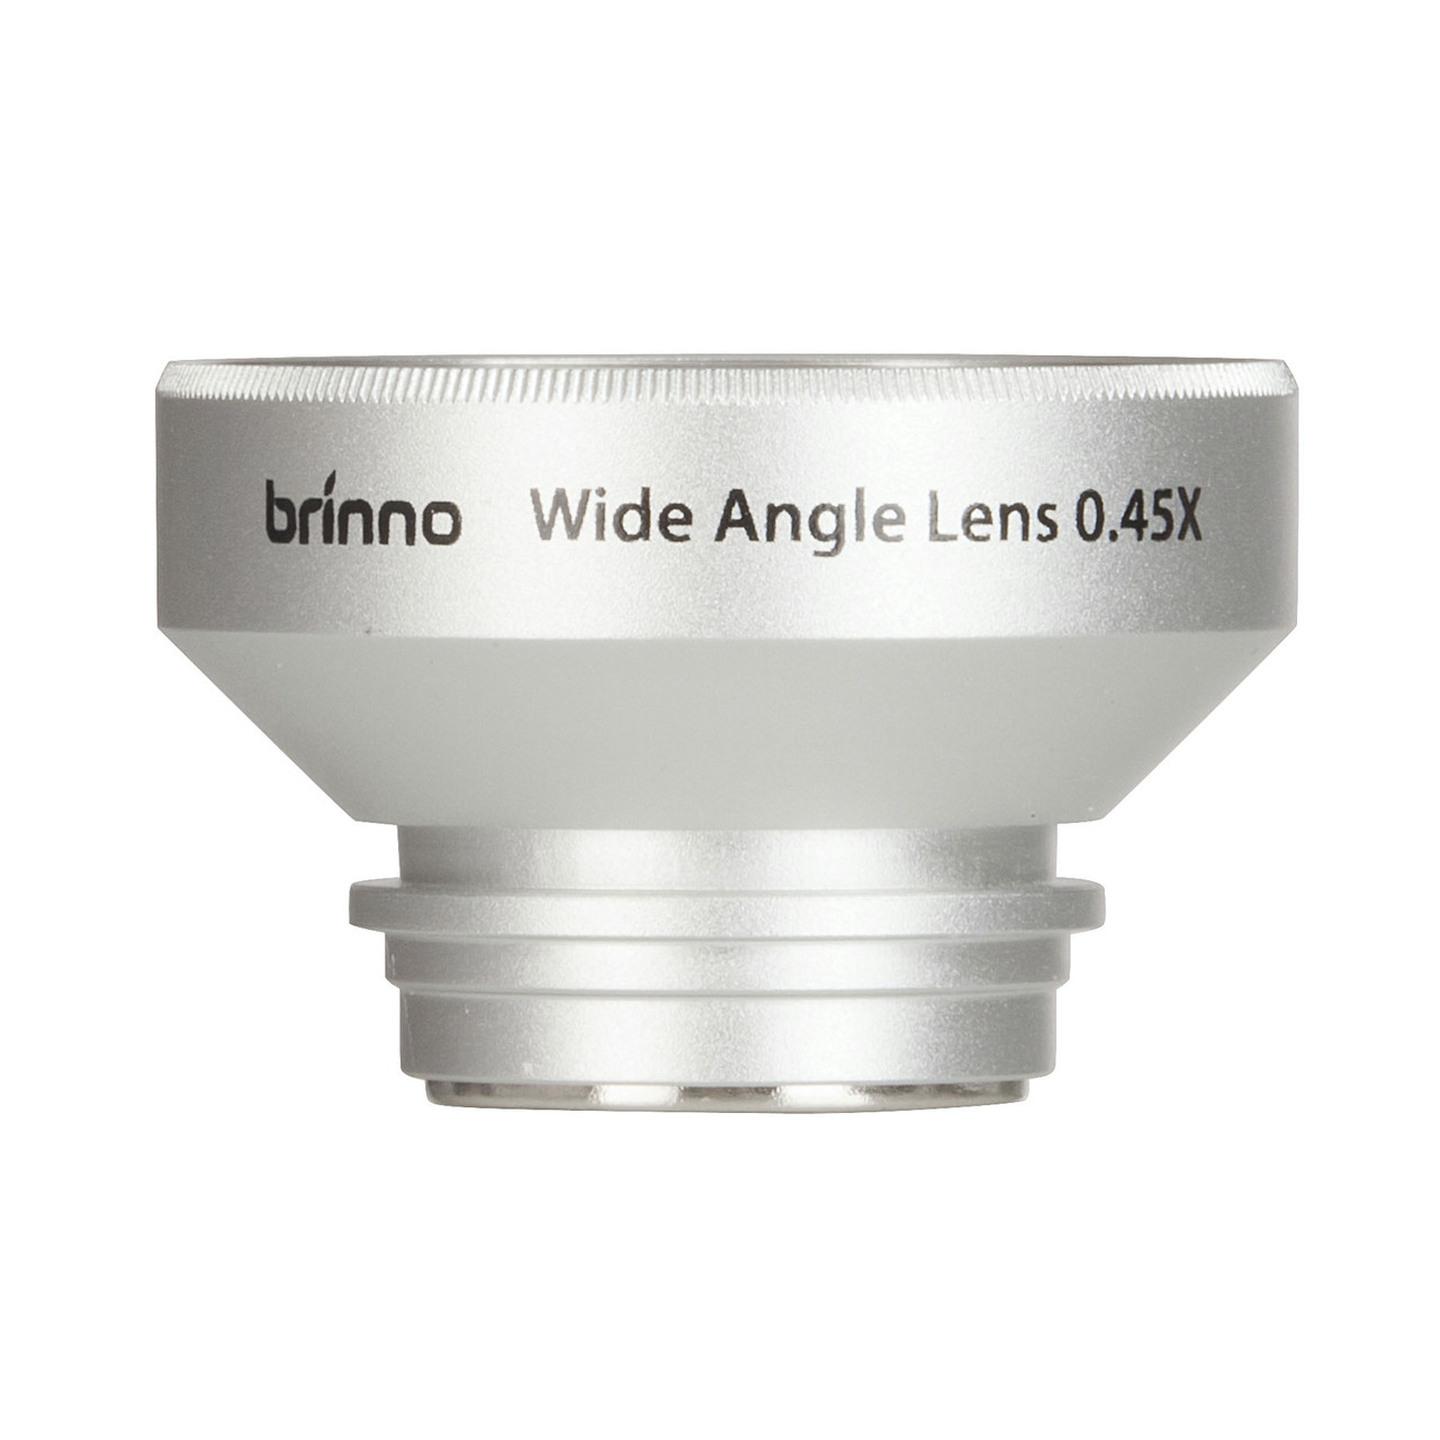 Wide Angle Lens for Time Lapse Camera QC-8034 